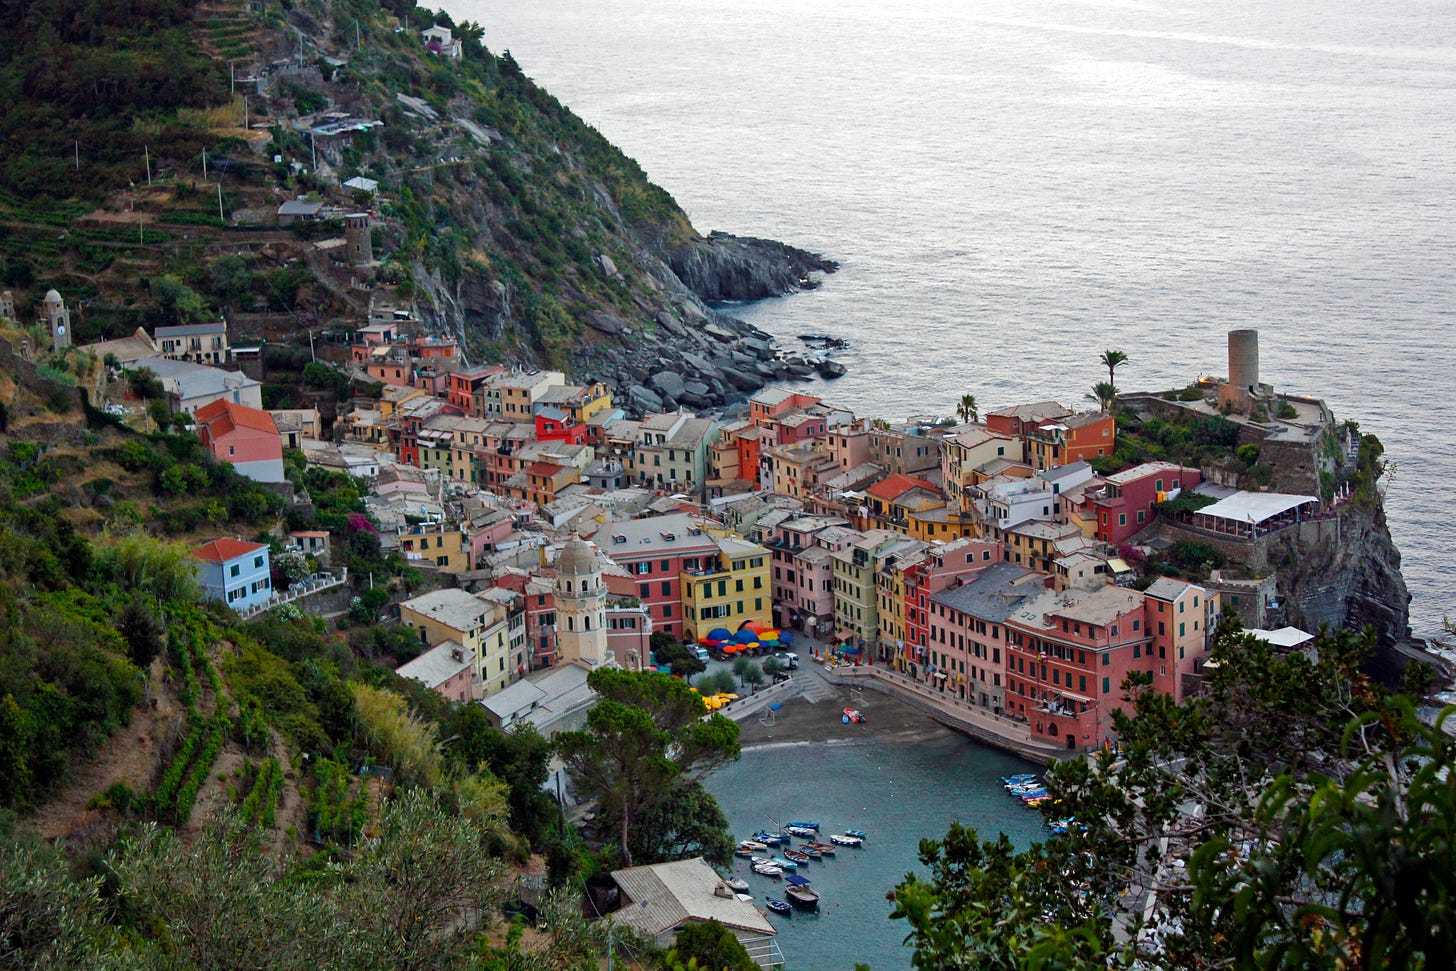 Vernazza, Italy, seen from the hillside above. It's a small town of colorful buildings on the seaside.